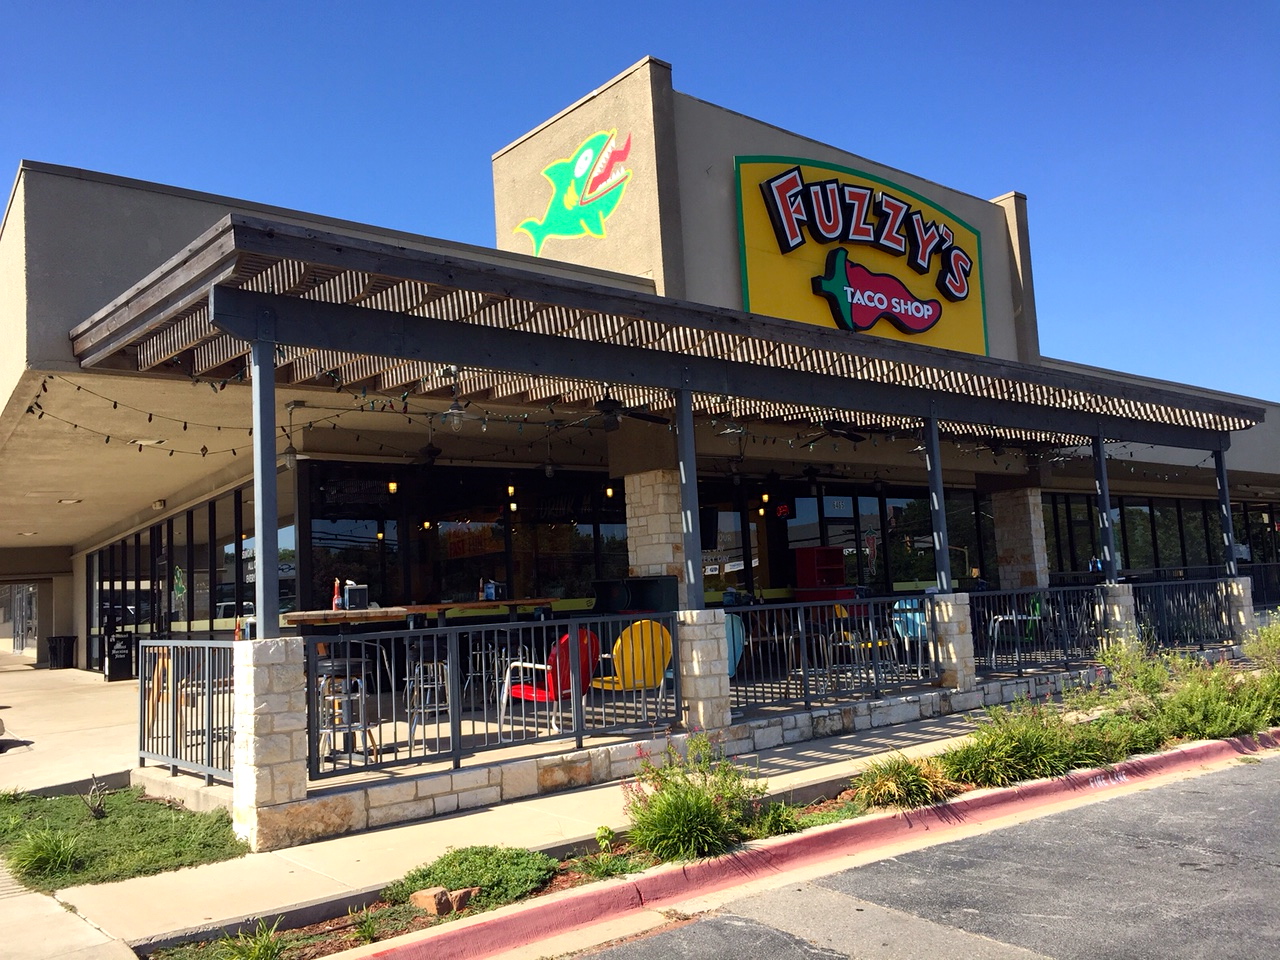 Fuzzy's is closing and Dream Cafe is opening in its place: Photo by Brittany Nunn